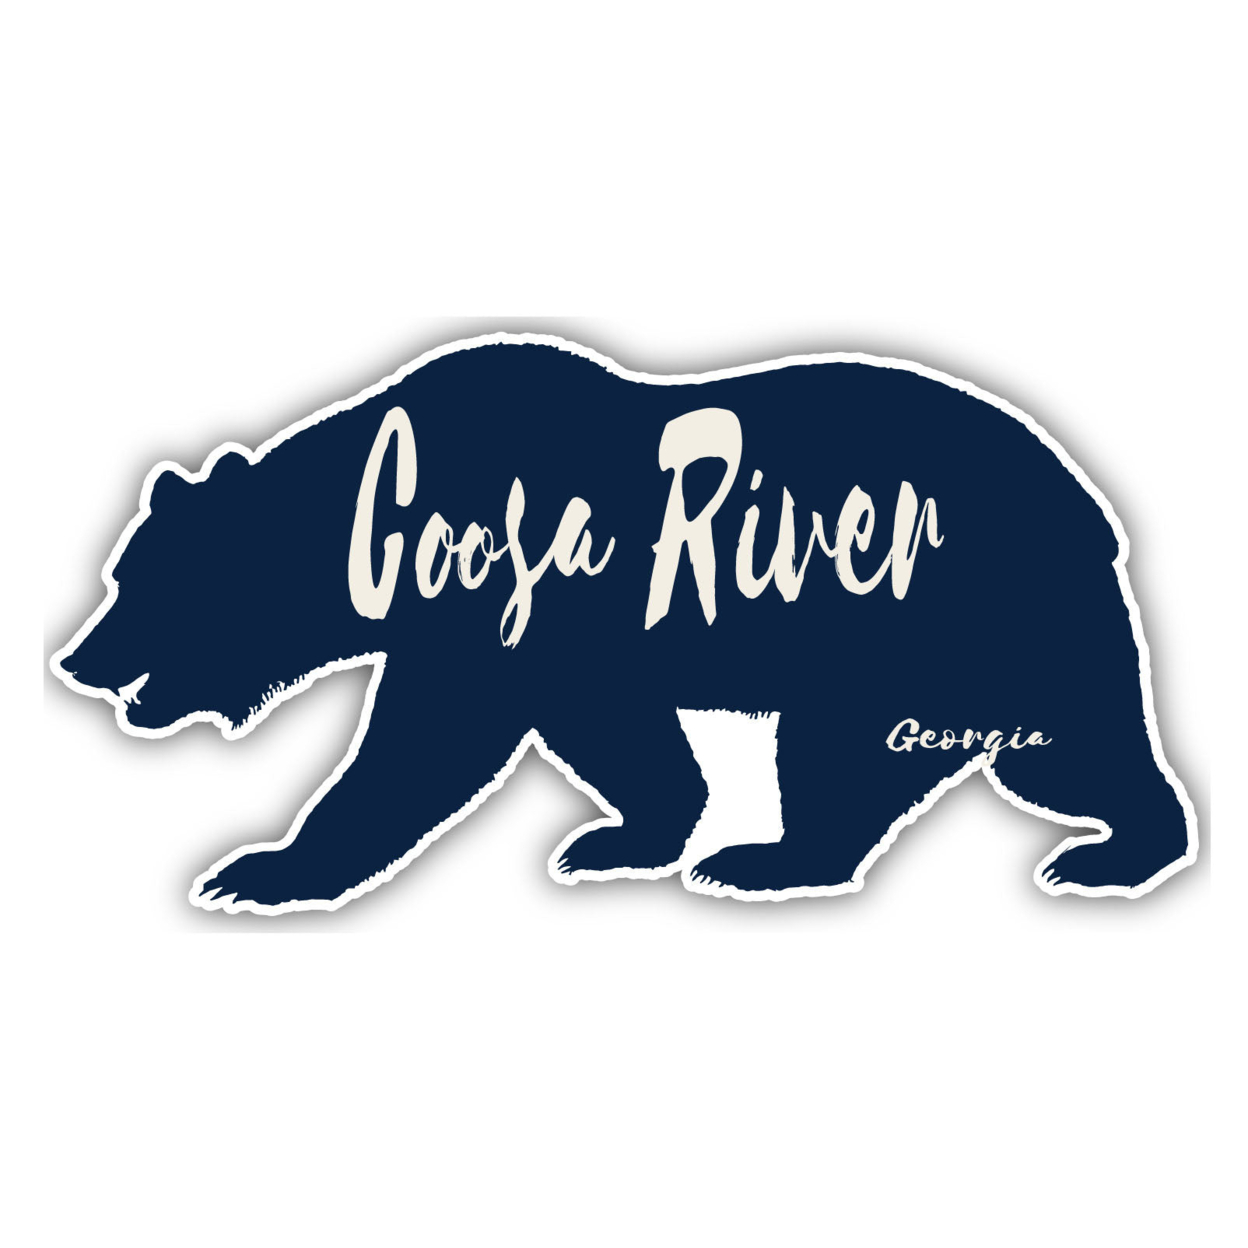 Coosa River Georgia Souvenir Decorative Stickers (Choose Theme And Size) - 4-Pack, 2-Inch, Bear